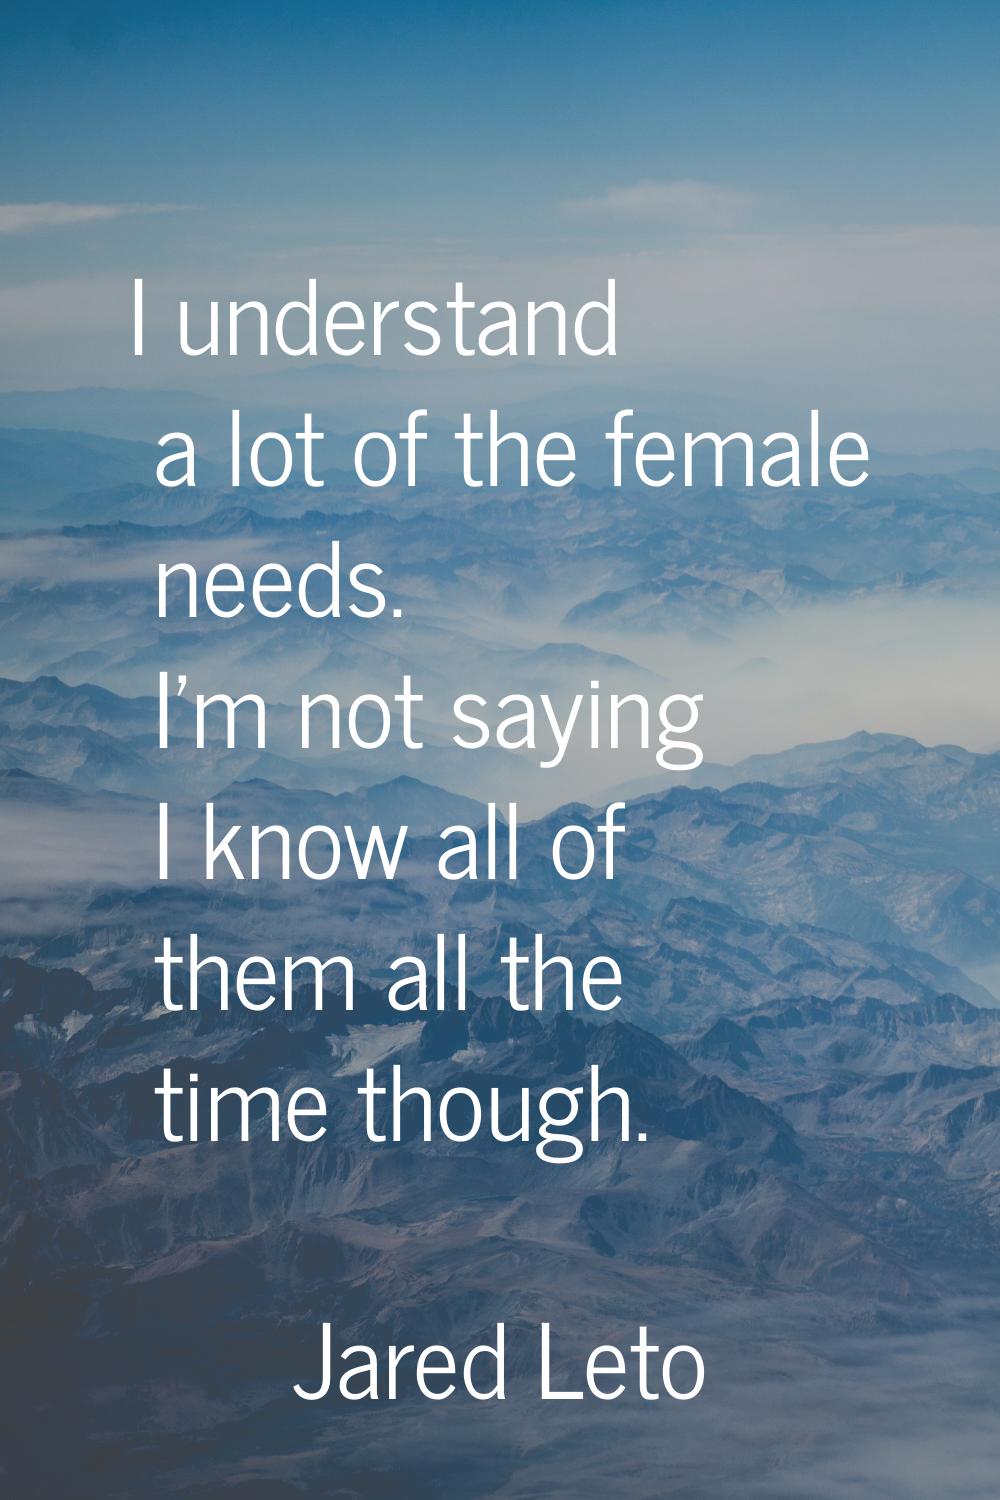 I understand a lot of the female needs. I'm not saying I know all of them all the time though.